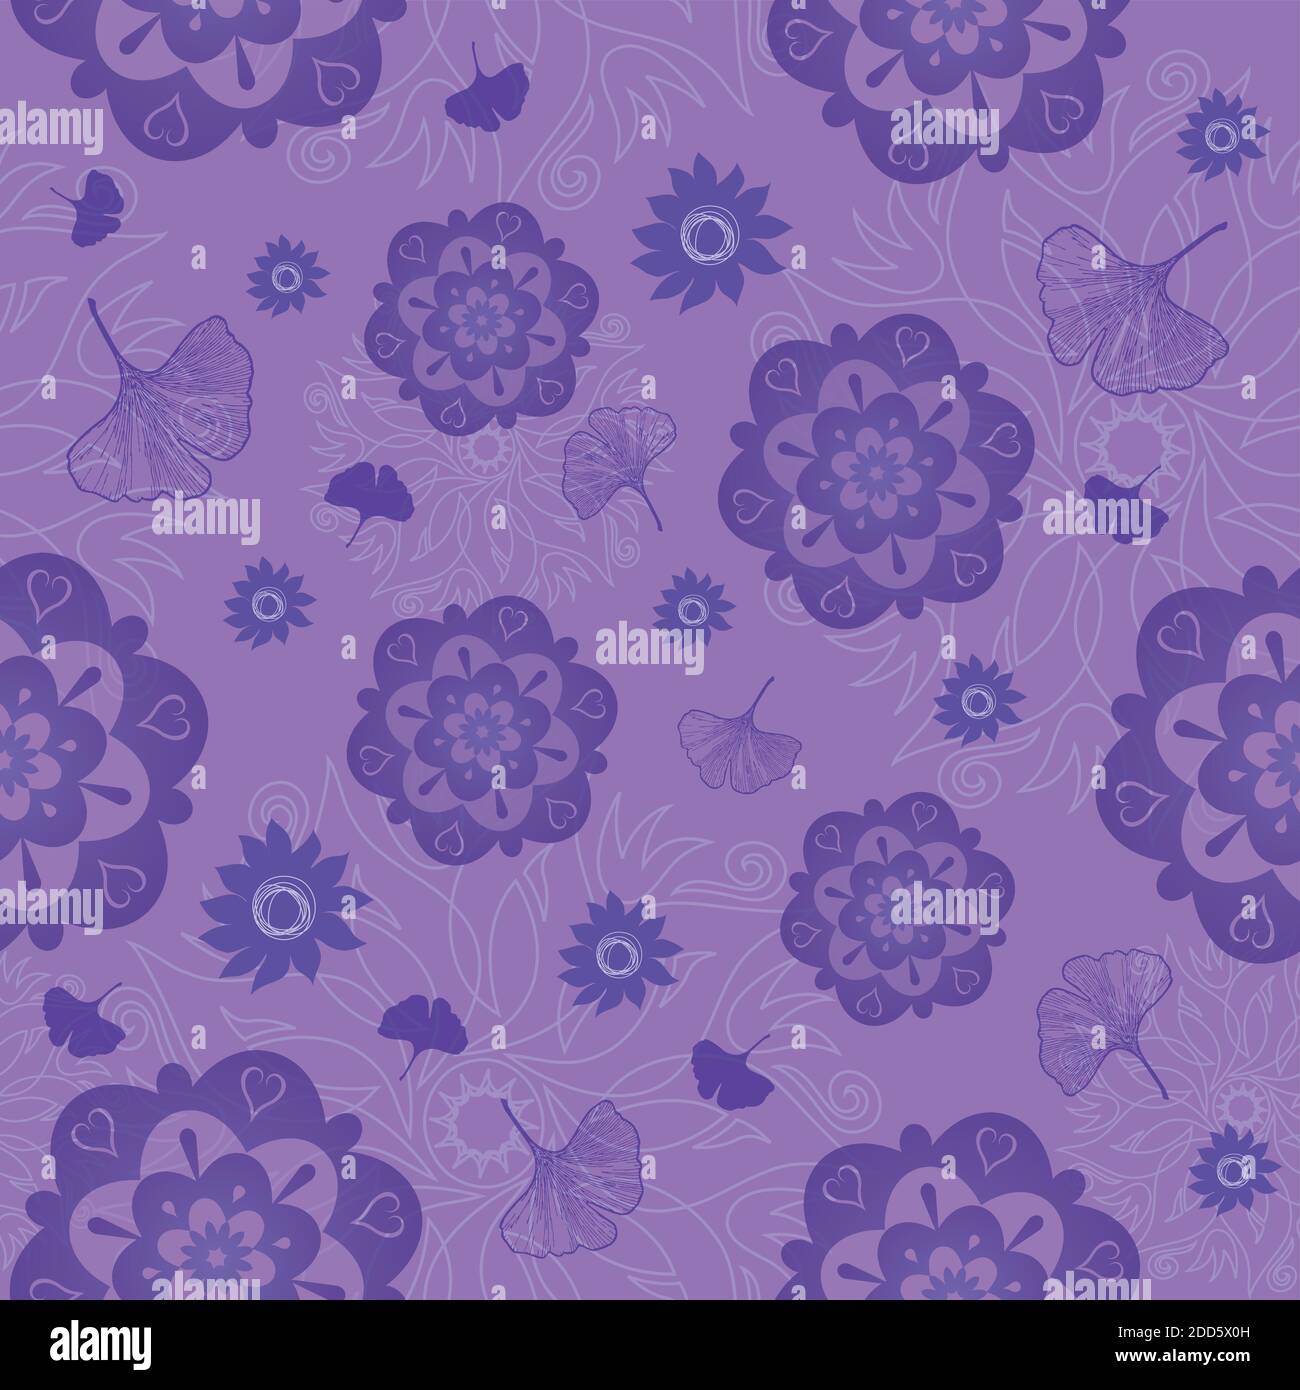 Flower Mandala Seamless Pattern in Violet with Leaves on Lila Background Stock Vector